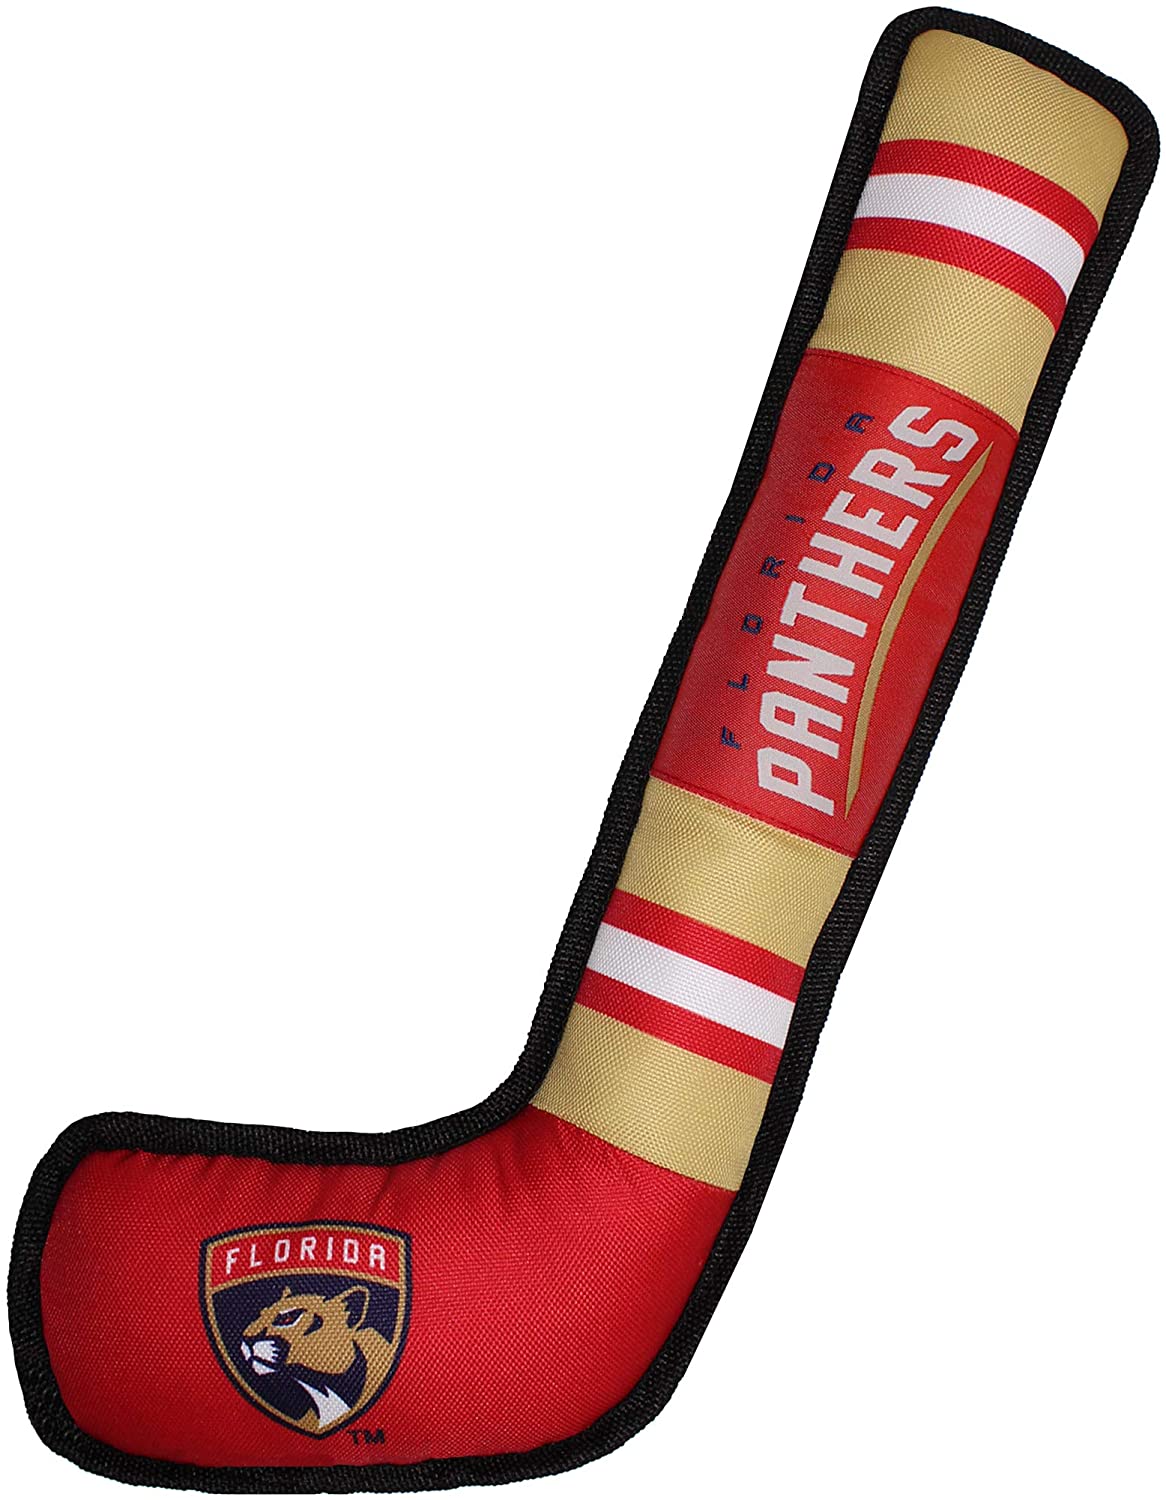 Florida Panthers Hockey Stick Pet Toy with Noisemaker